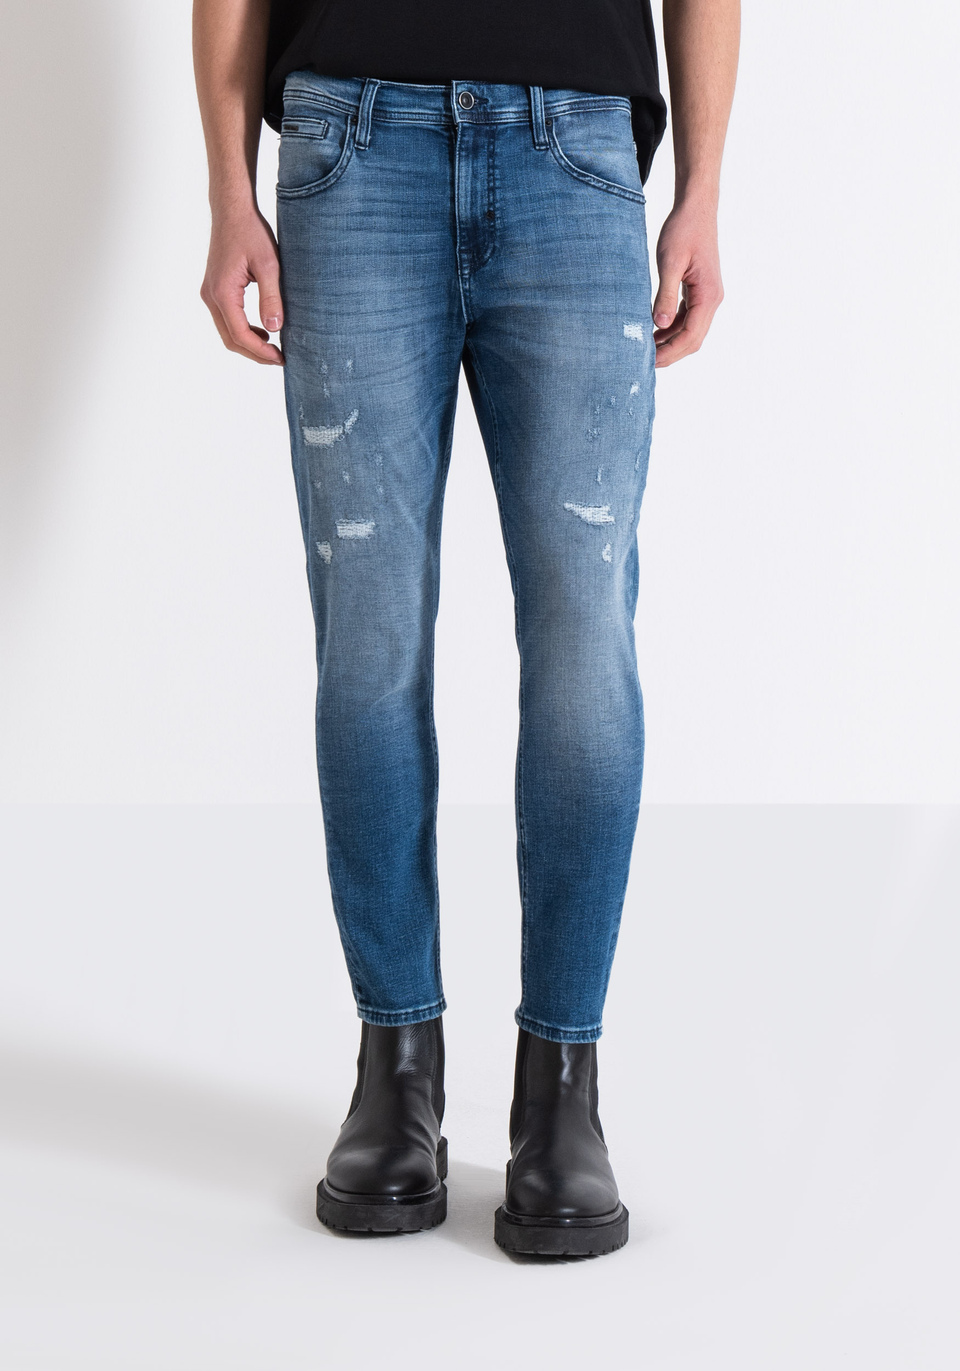 "KARL" CROPPED FIT SKINNY JEANS IN BLUE STRETCH DENIM WITH LIGHT WASH - Antony Morato Online Shop